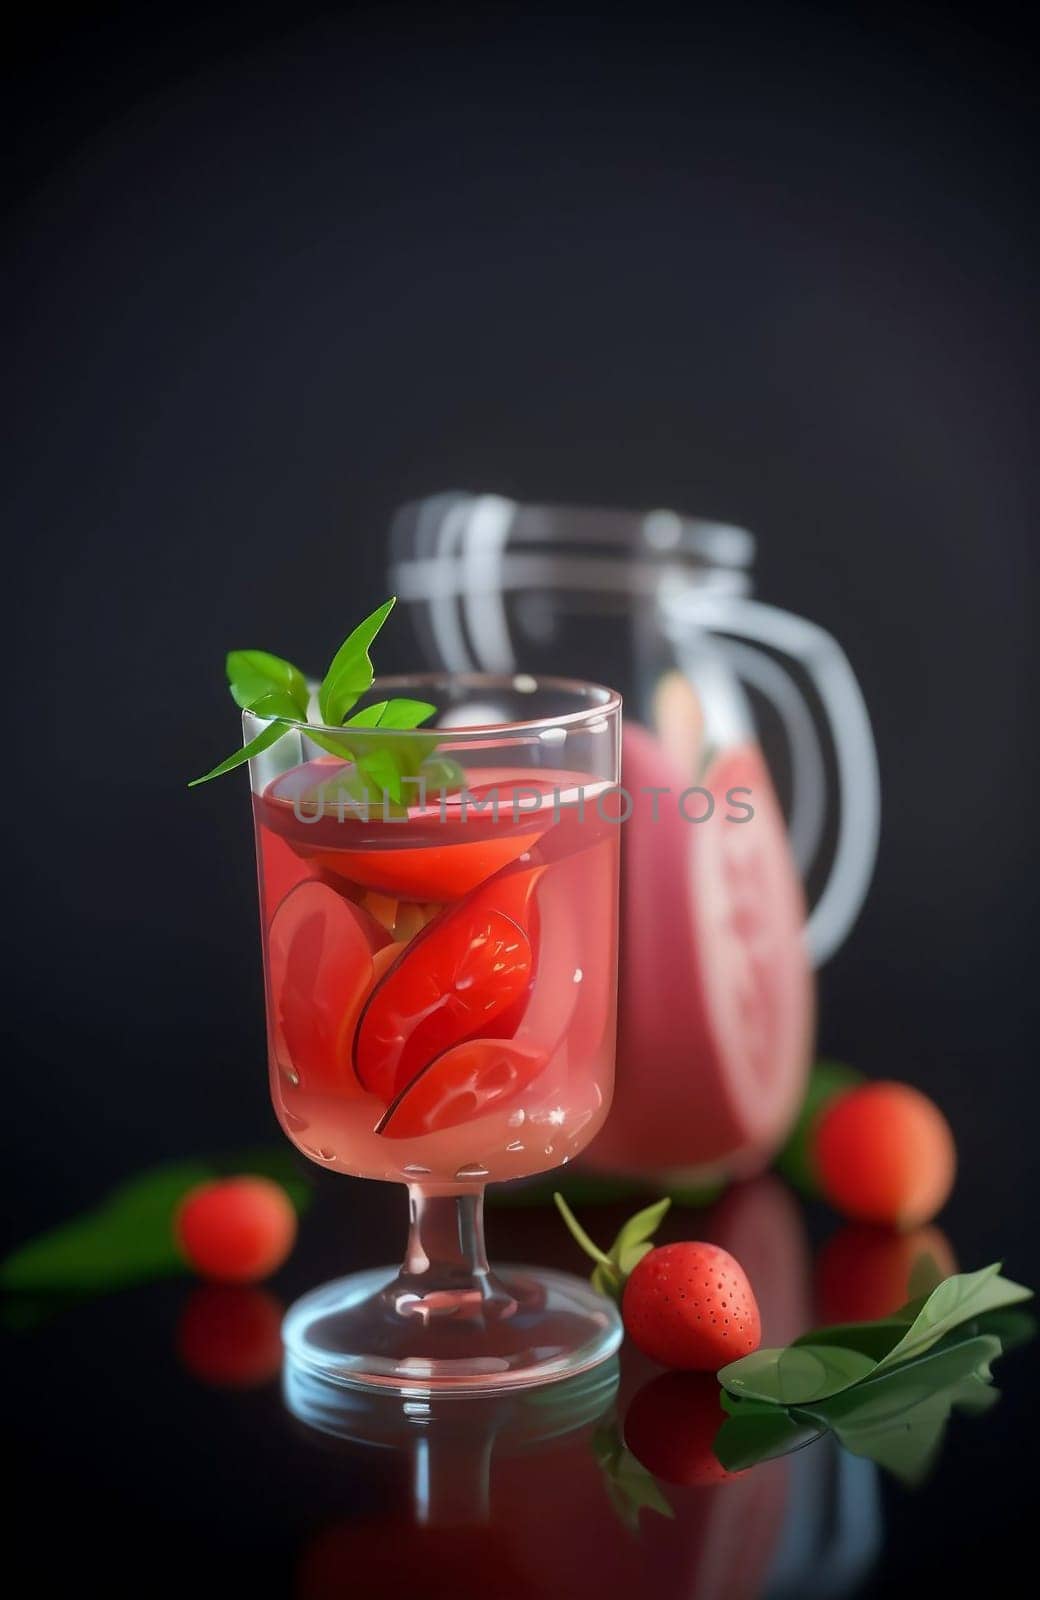 Cold summer strawberry kvass with mint in a glass by Rawlik